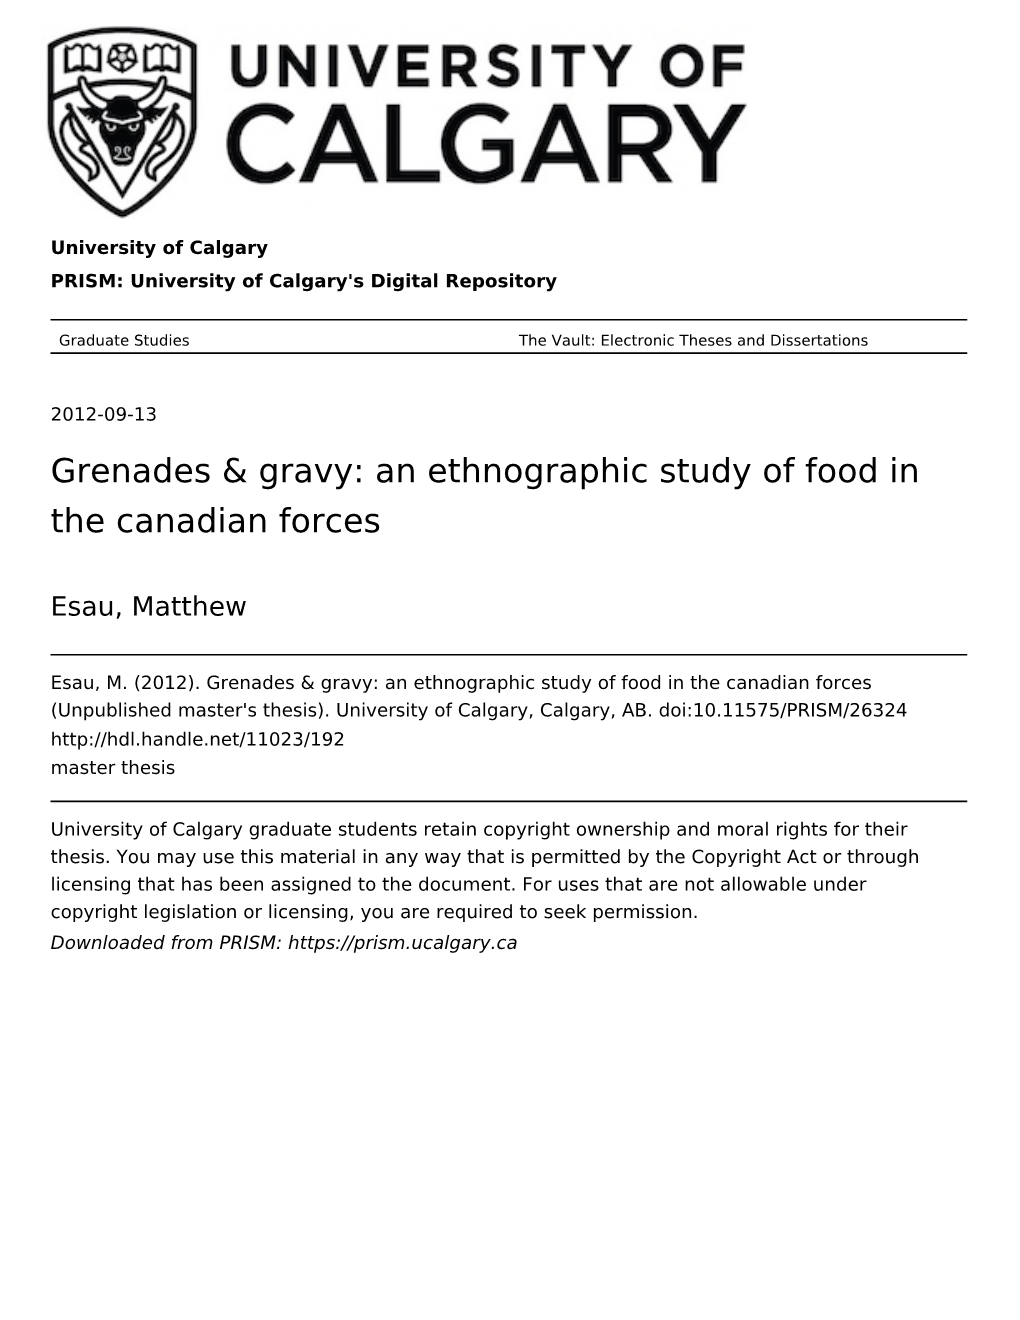 An Ethnographic Study of Food in the Canadian Forces